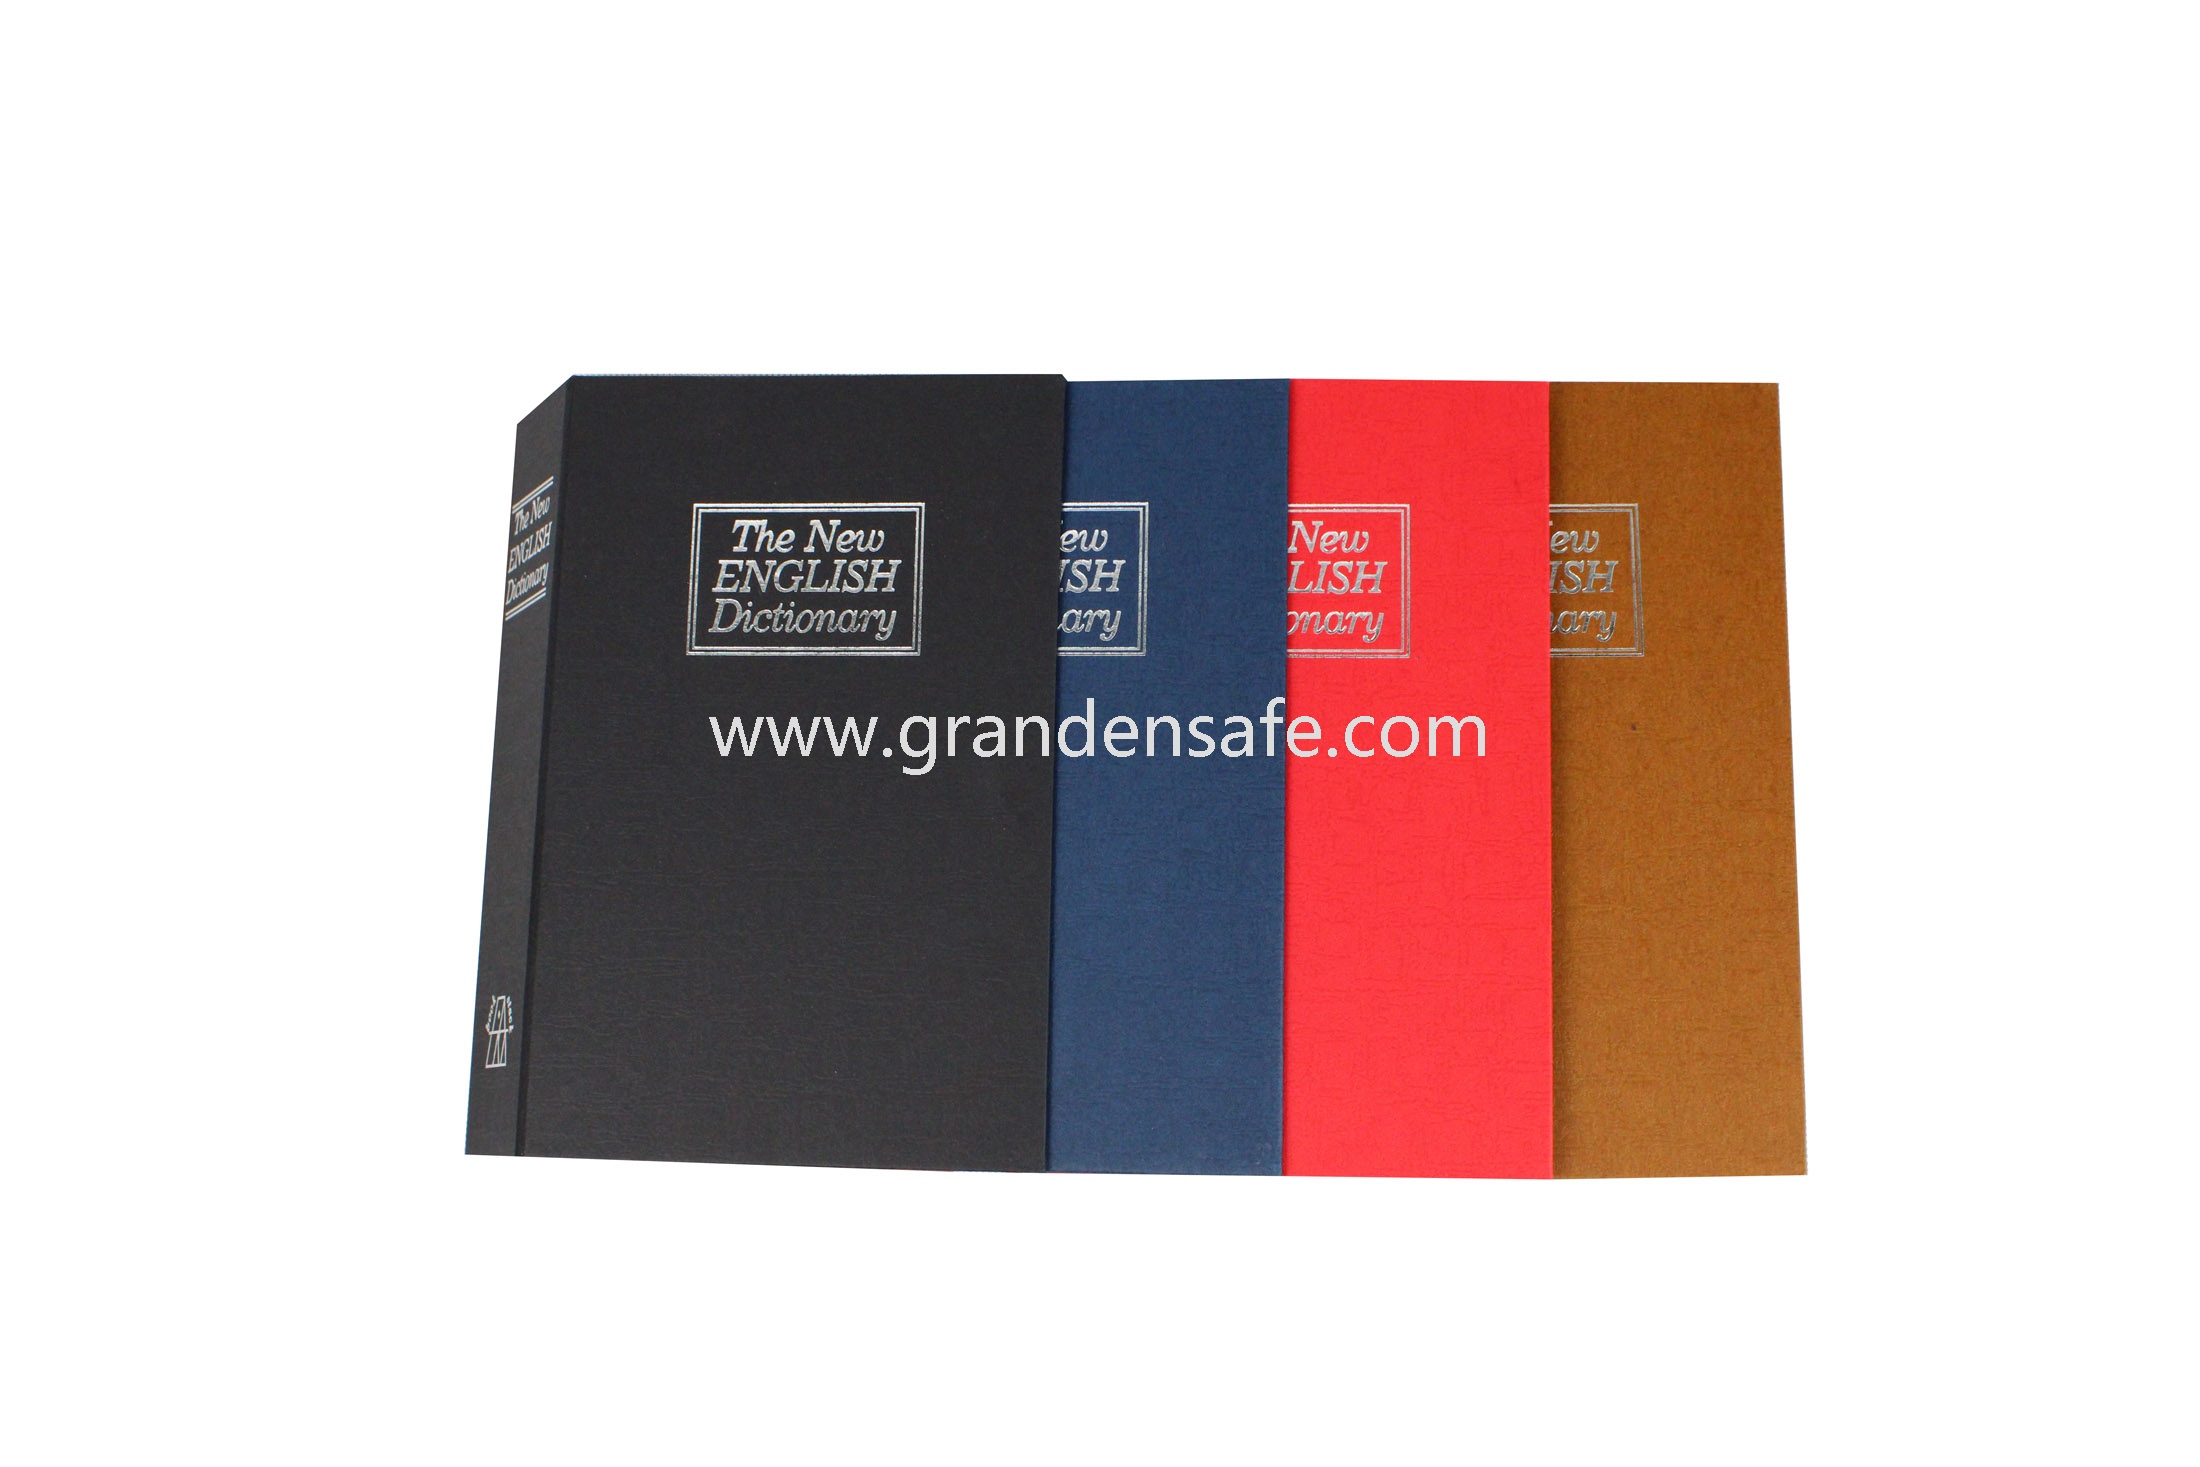 Book Safe with Paper Cover